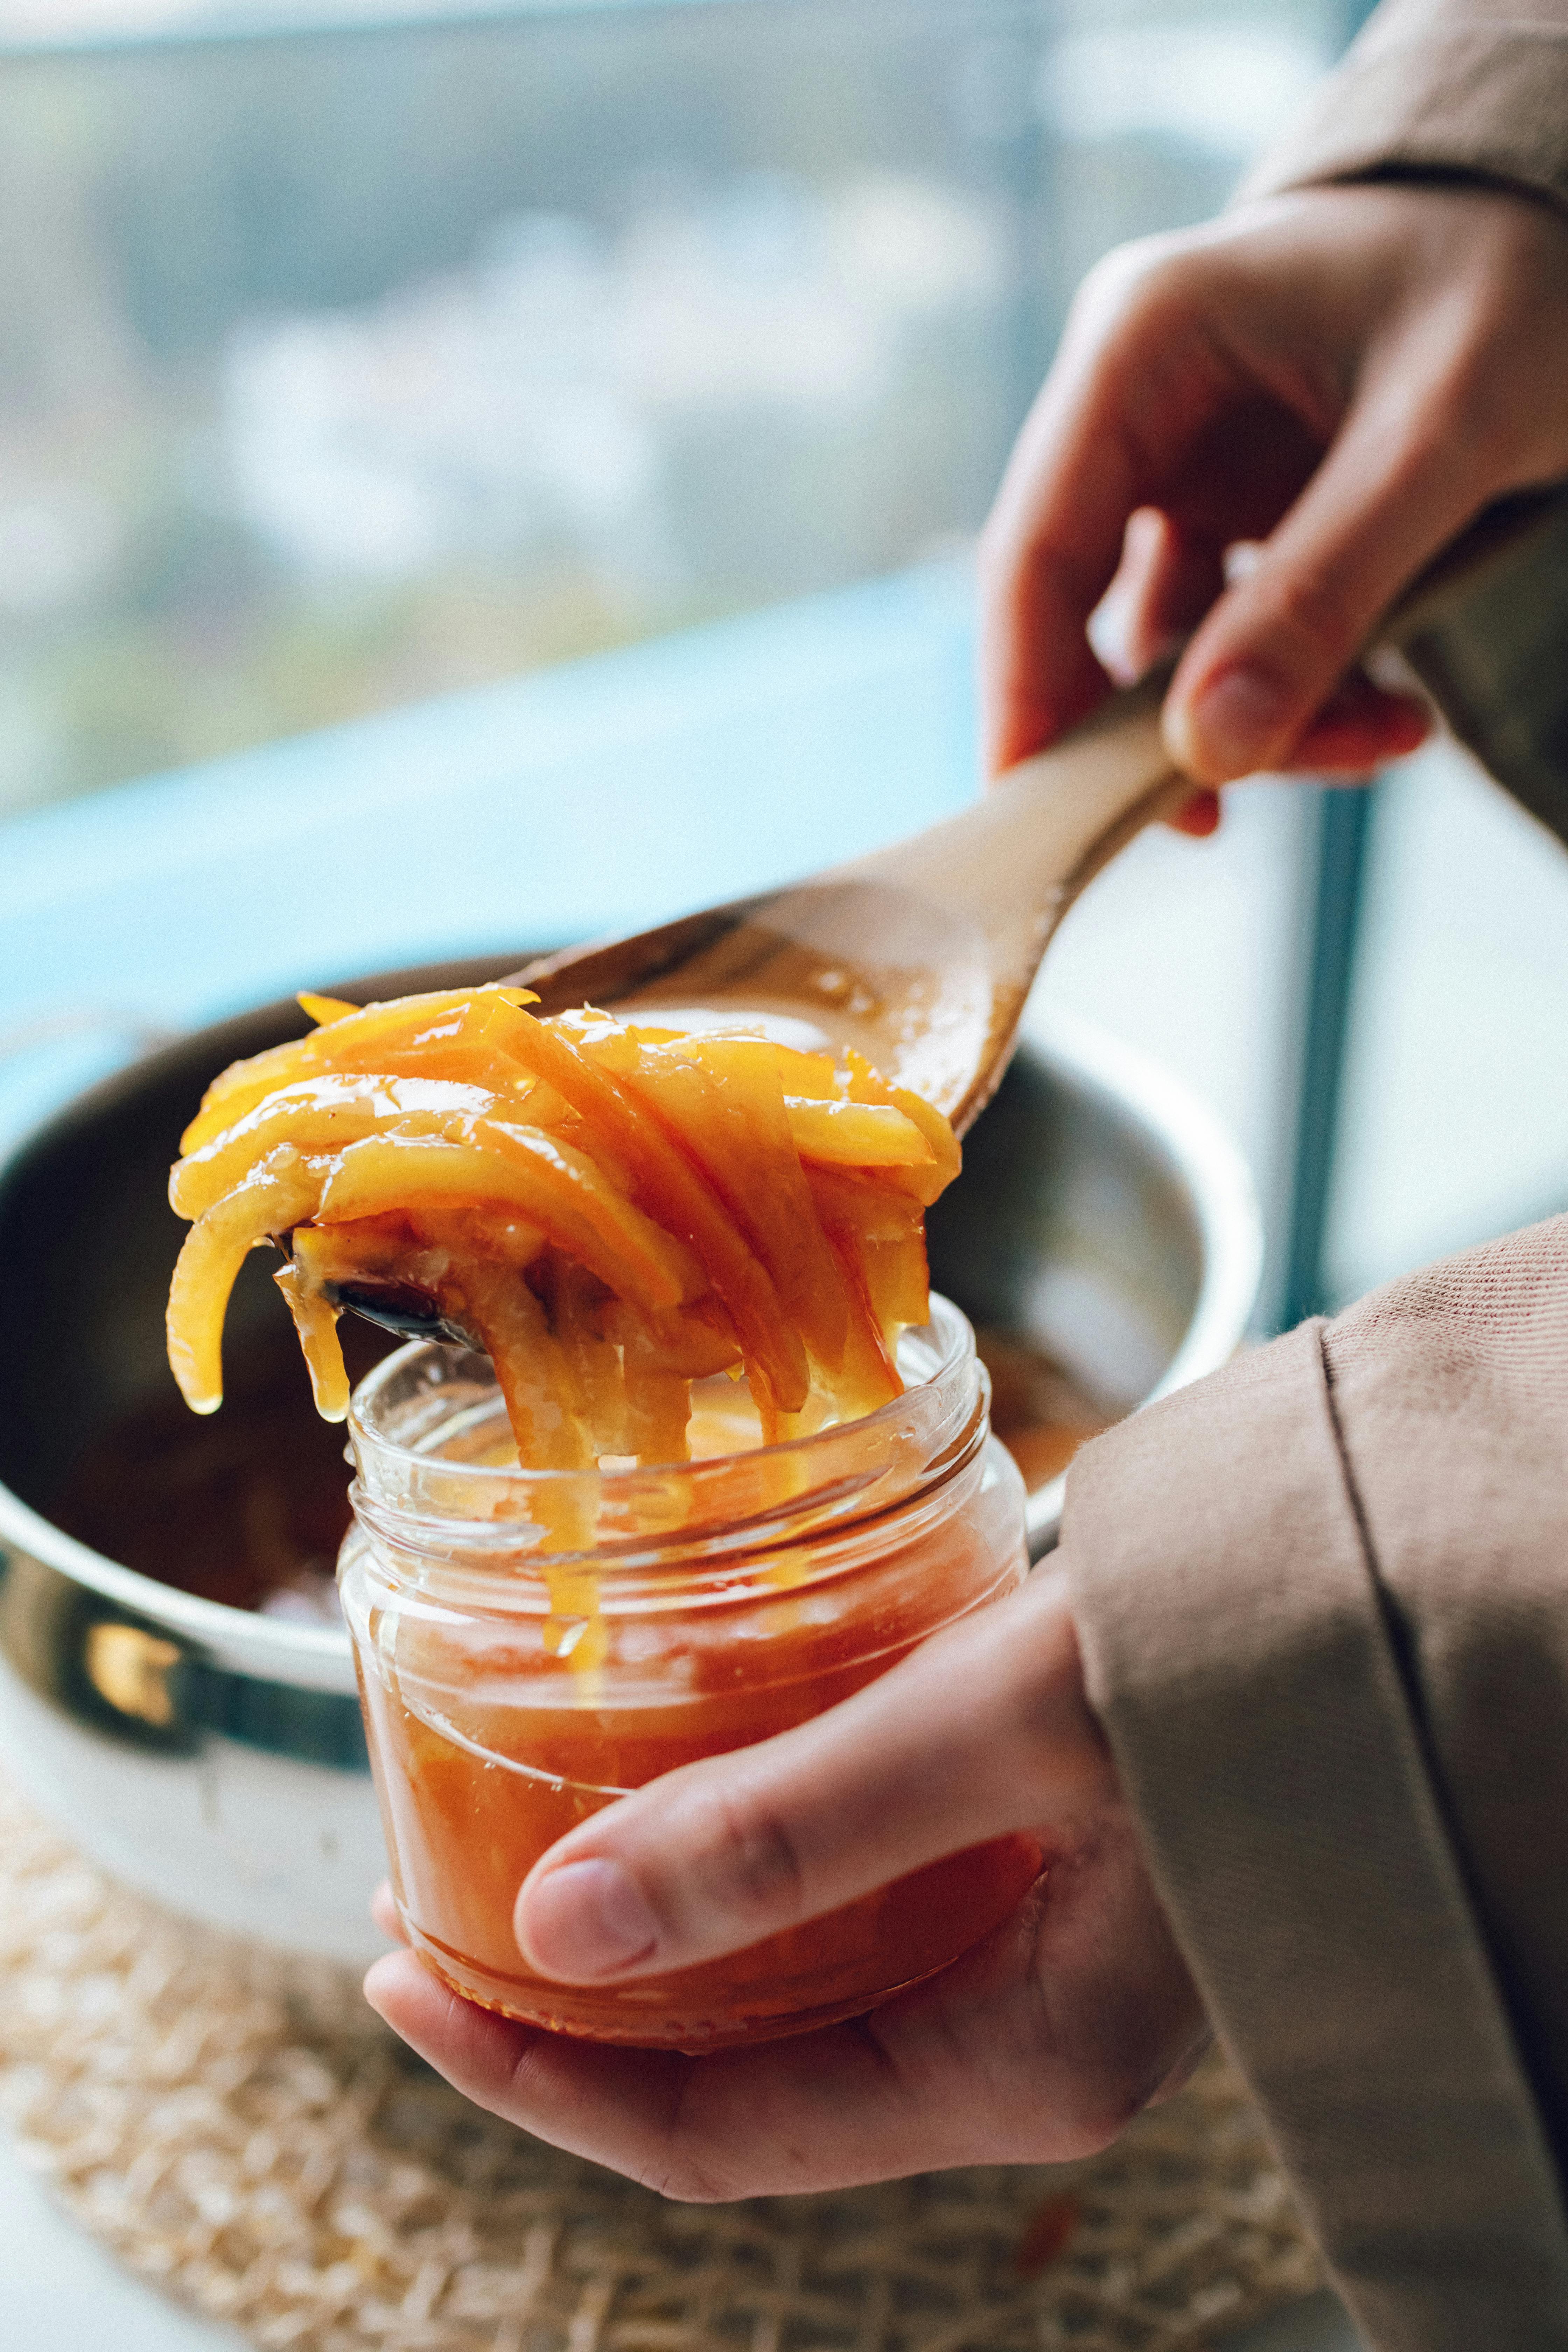 woman holding a spoon and a jar of homemade orange jam